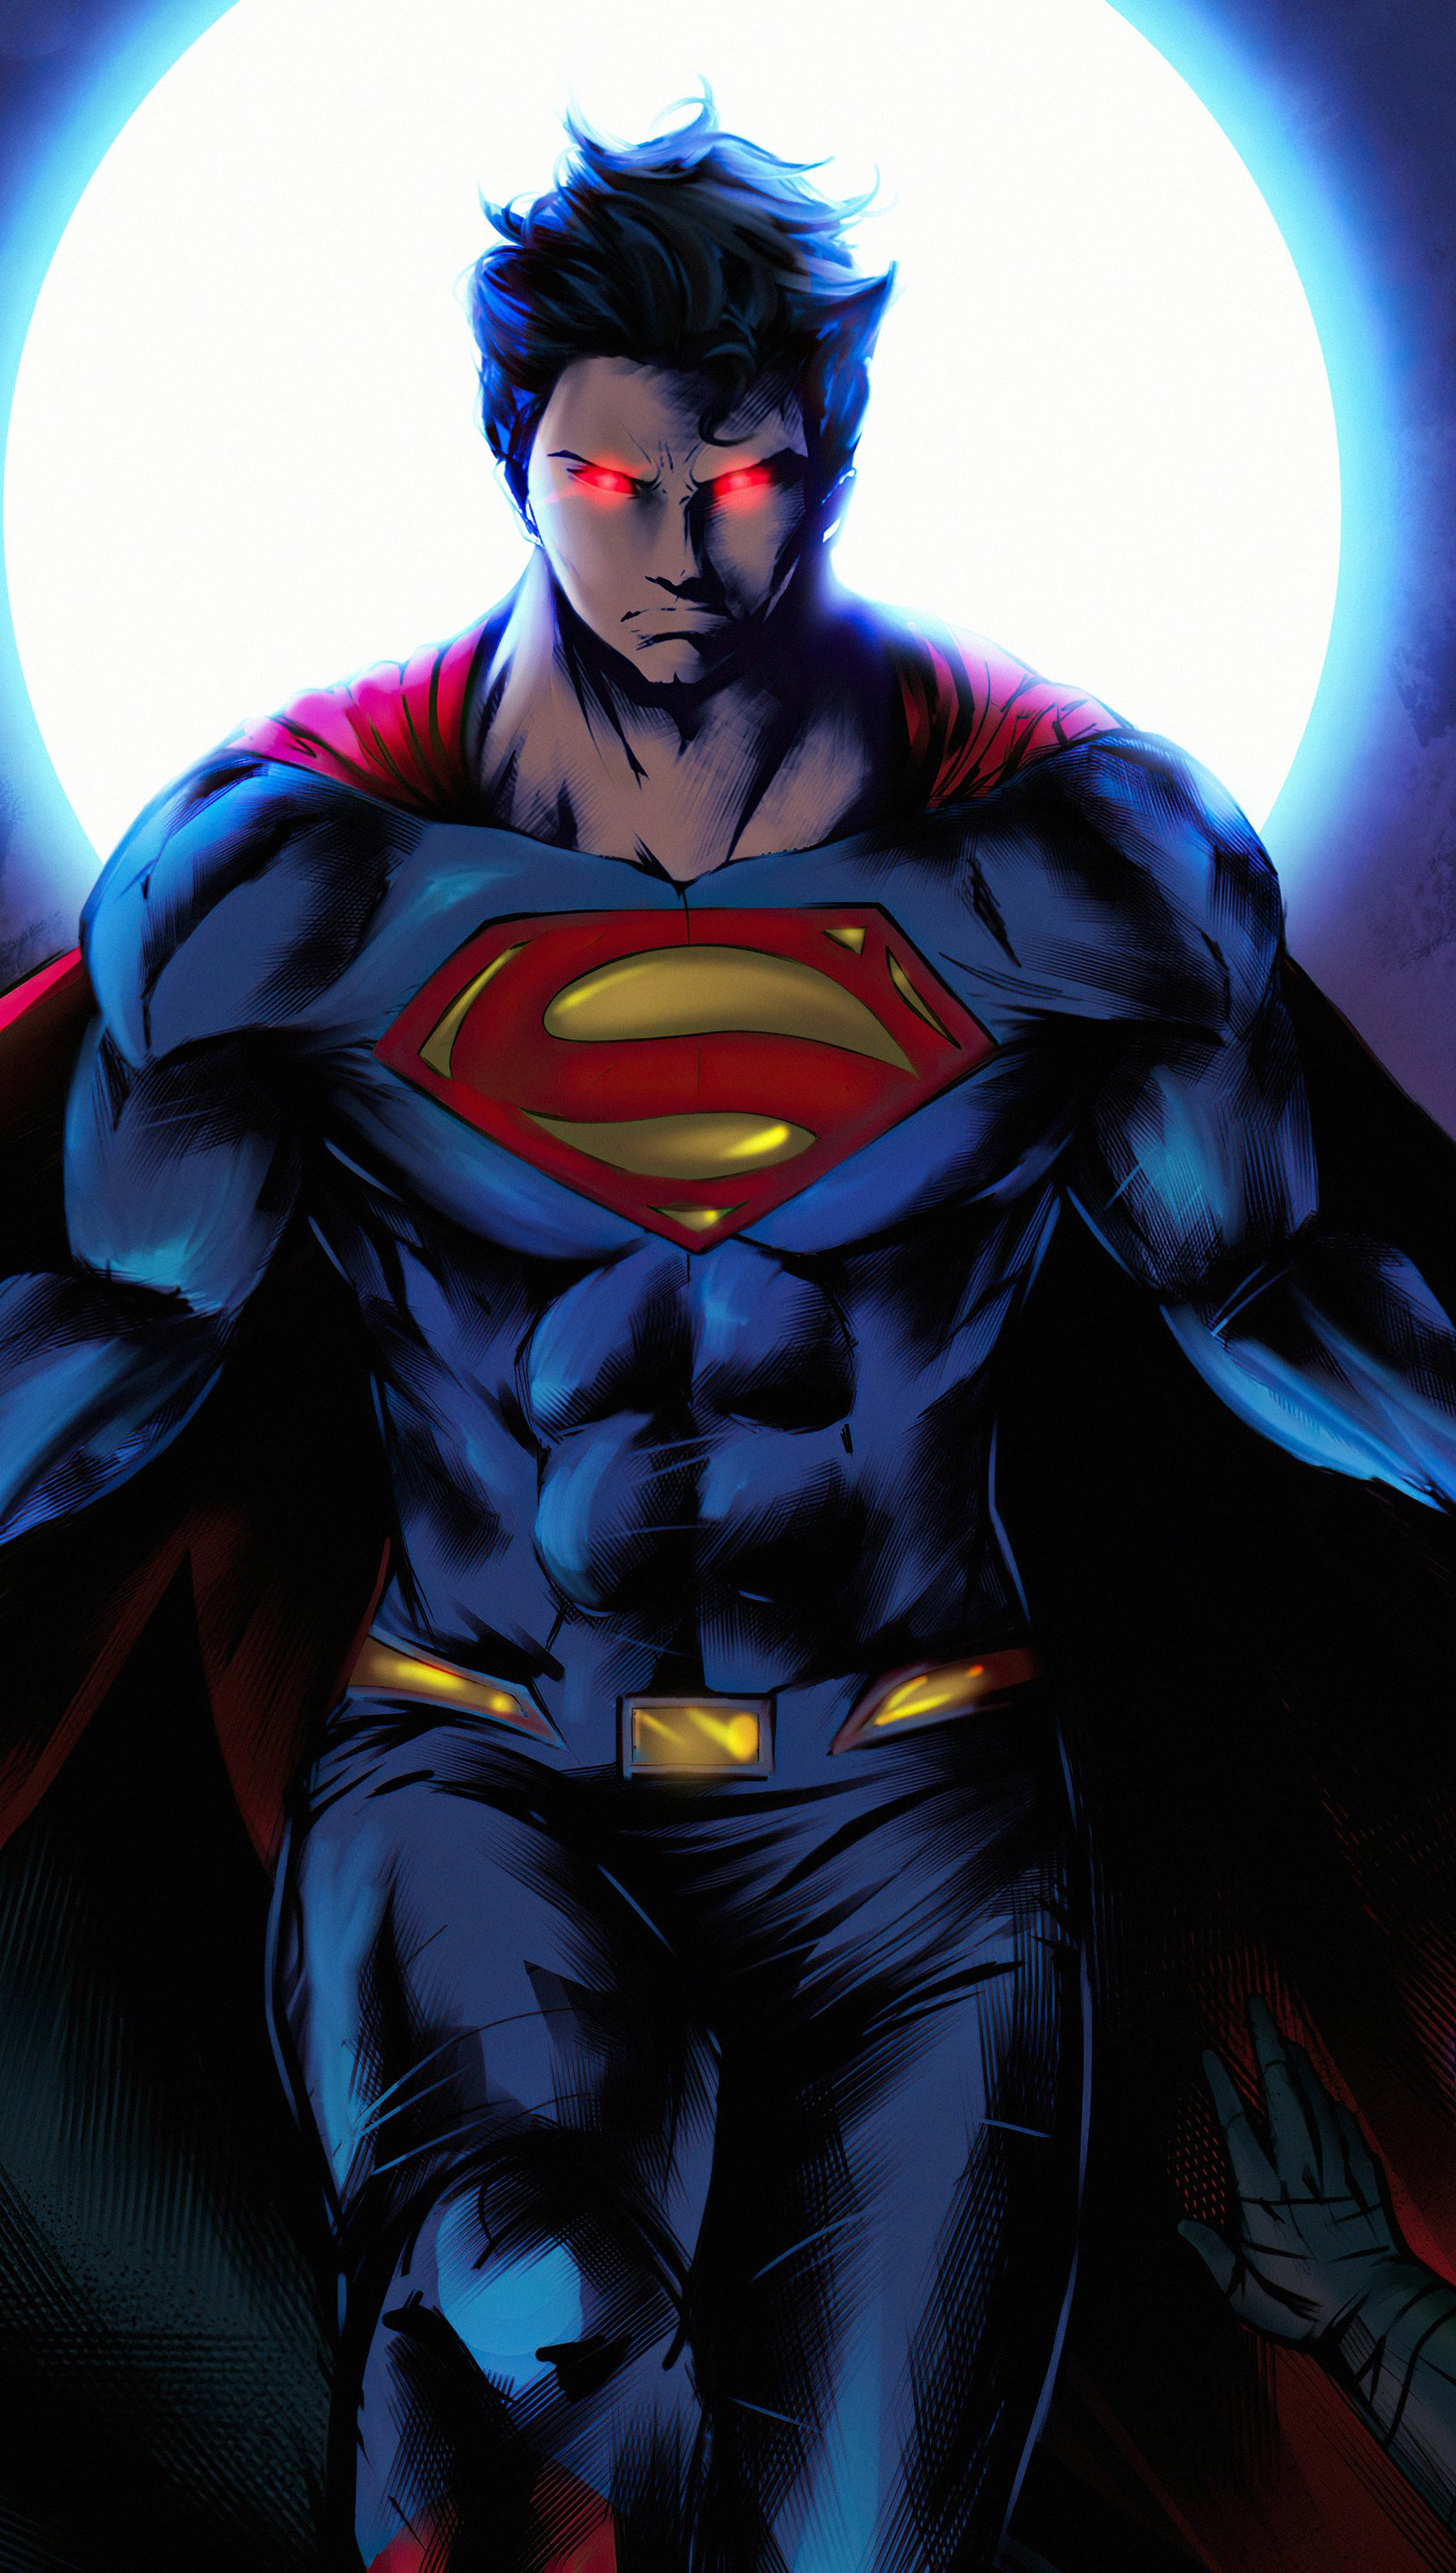 Superman cartoon wallpapers and backgrounds k hd dual screen